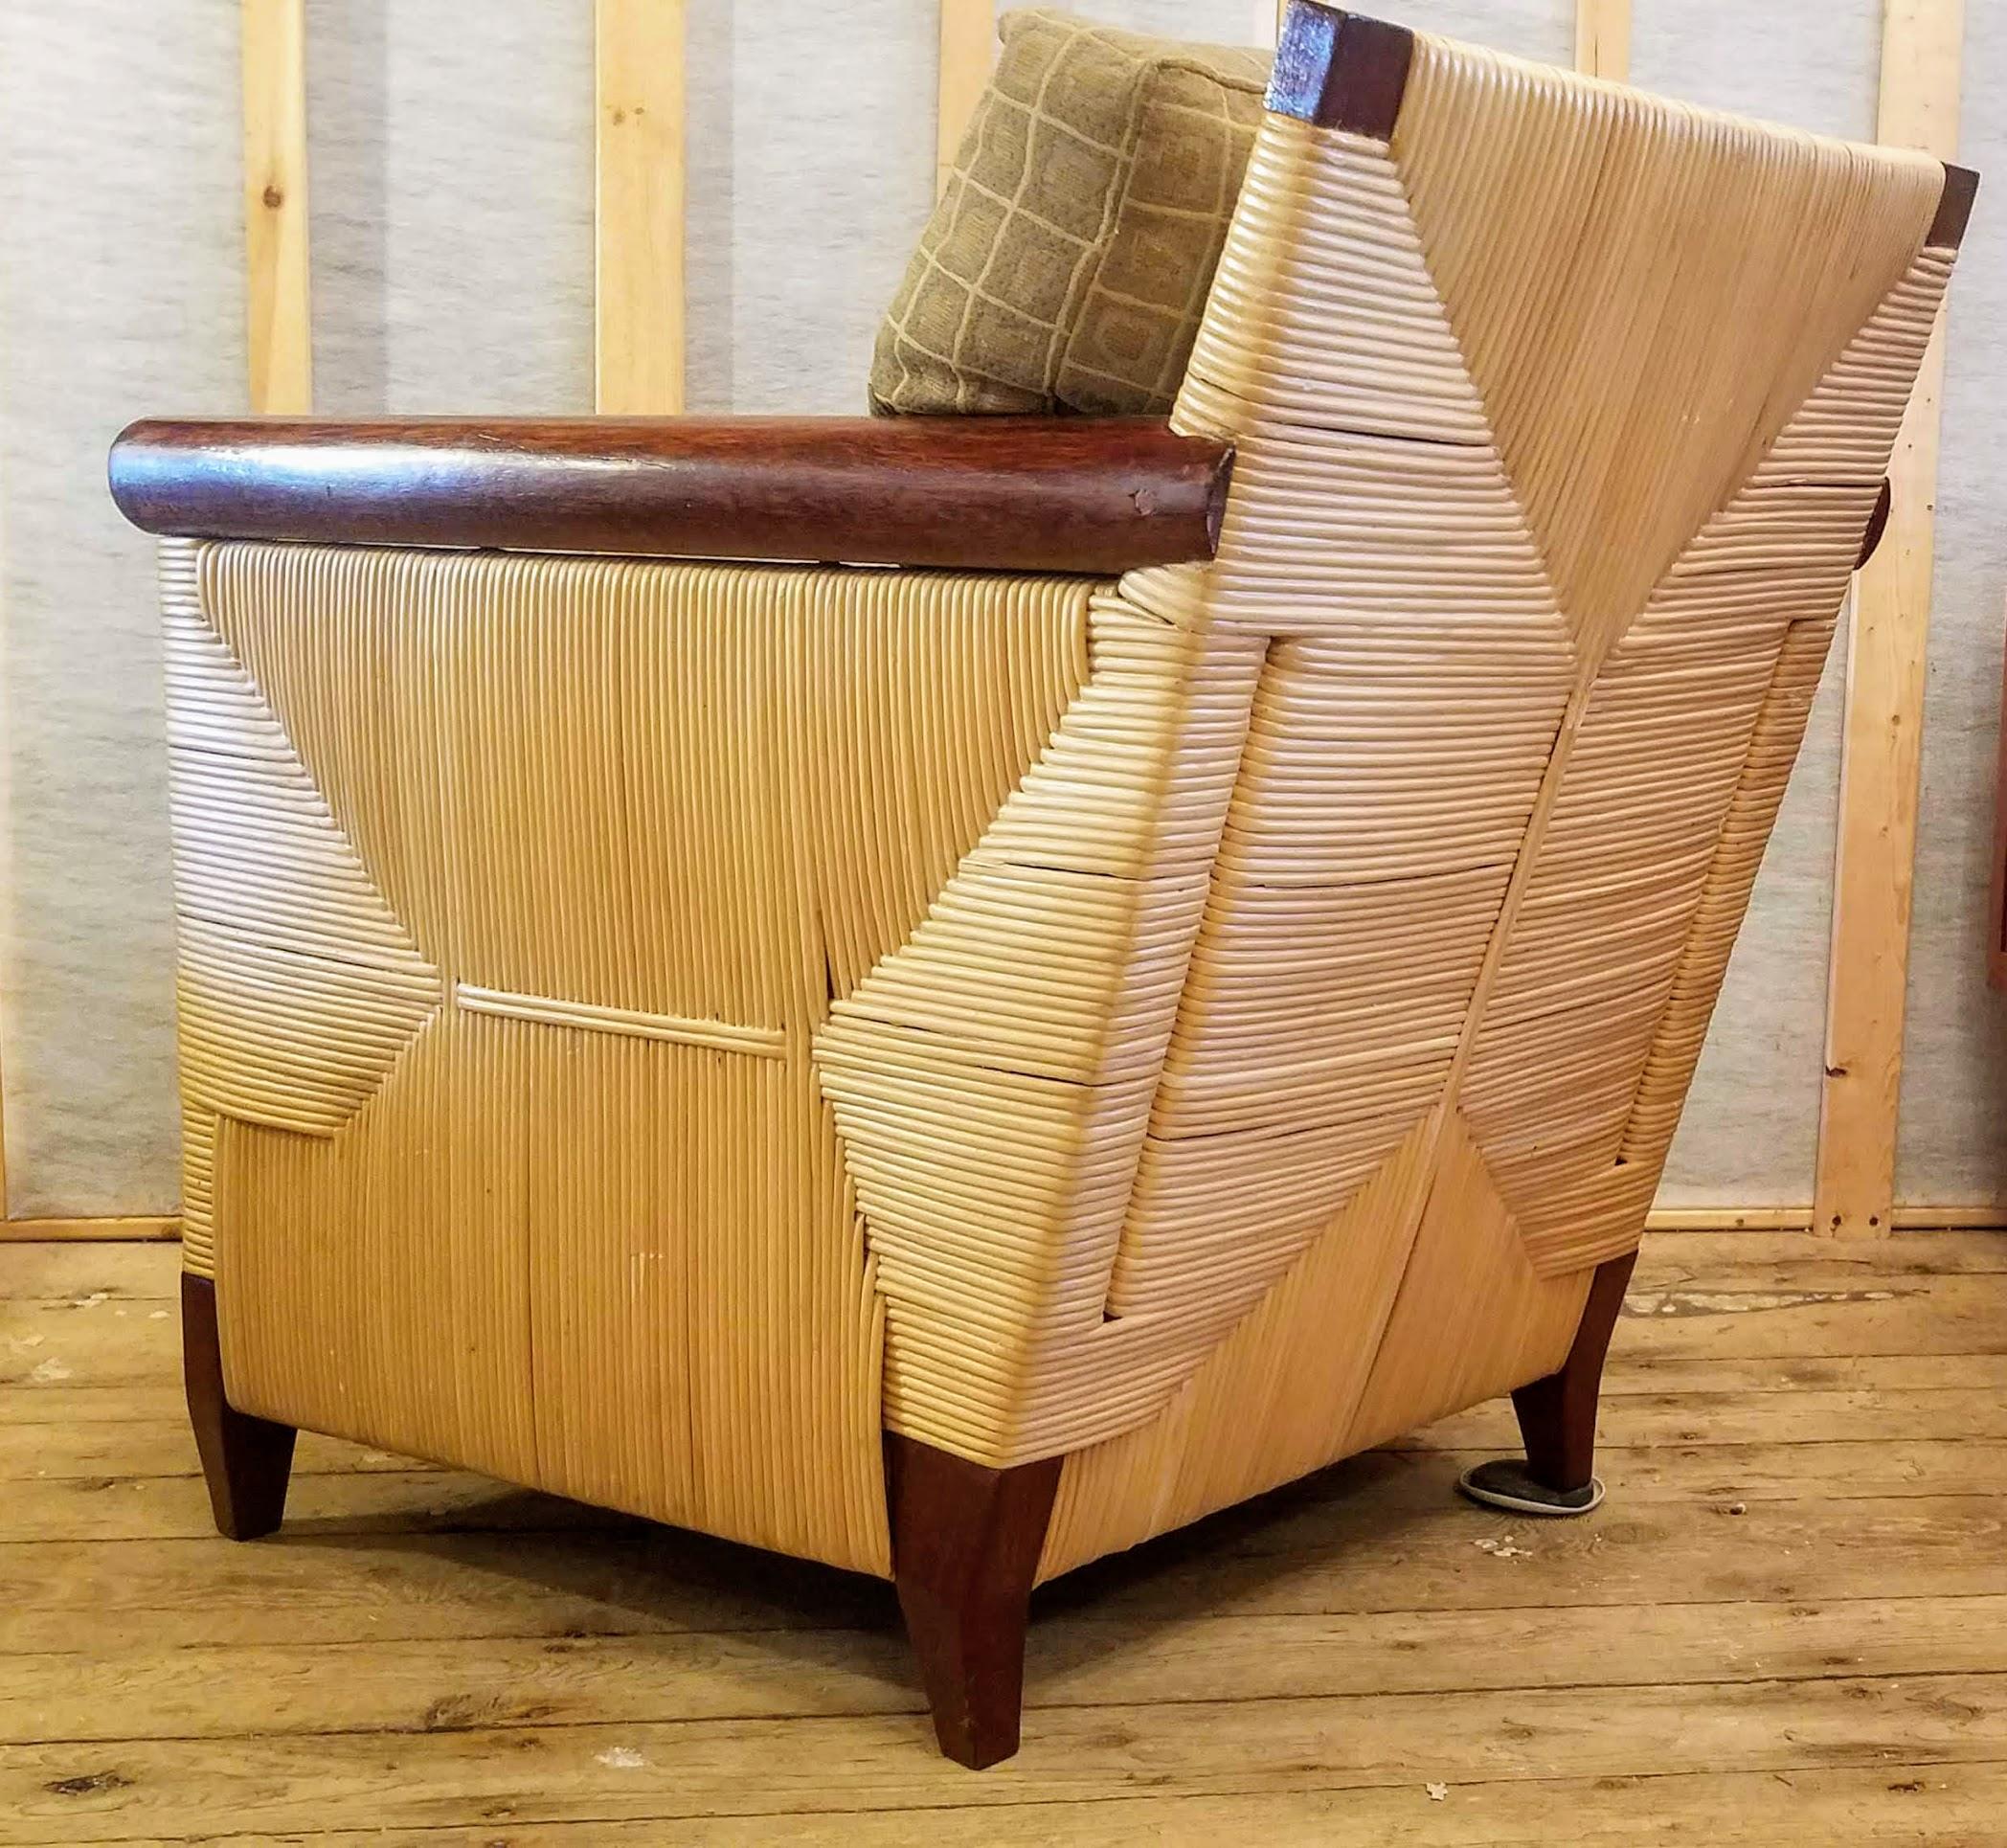 American Lounge Chair Donghia by John Hutton 1995 Mahogany and Cane